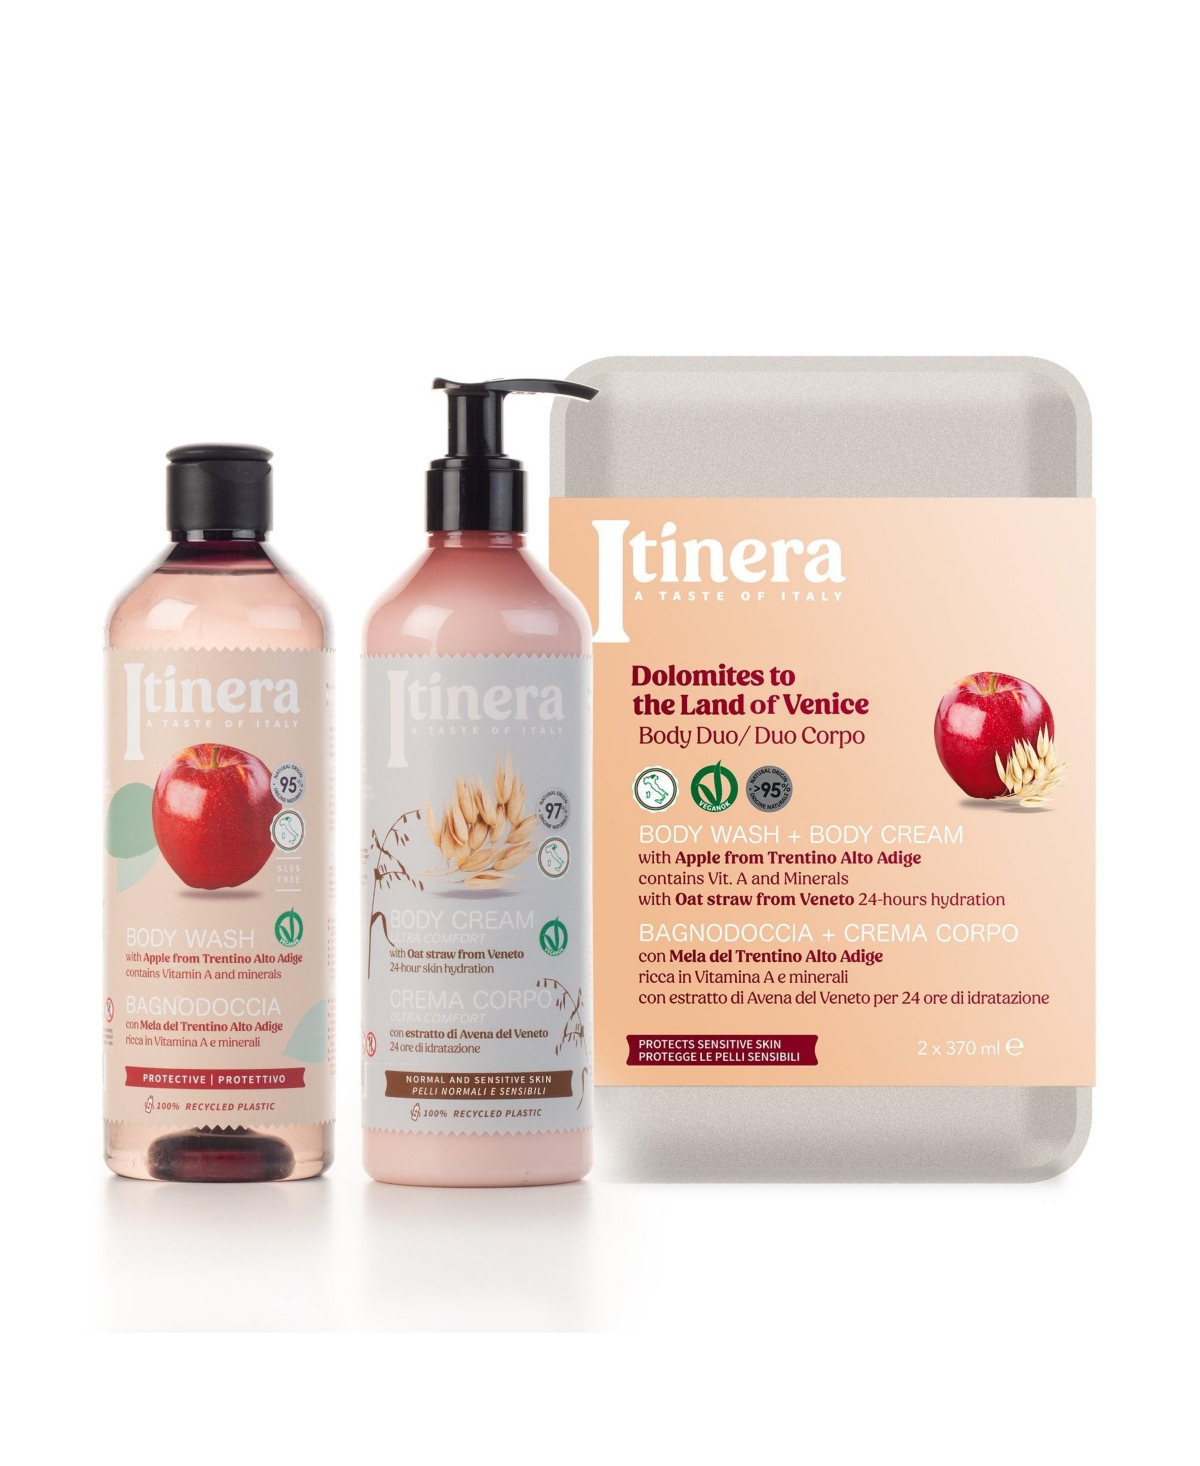 ITINERA DOLOMITES TO THE LAND OF VENICE GIFT BOX WITH BODY CREAM & BODY WASH